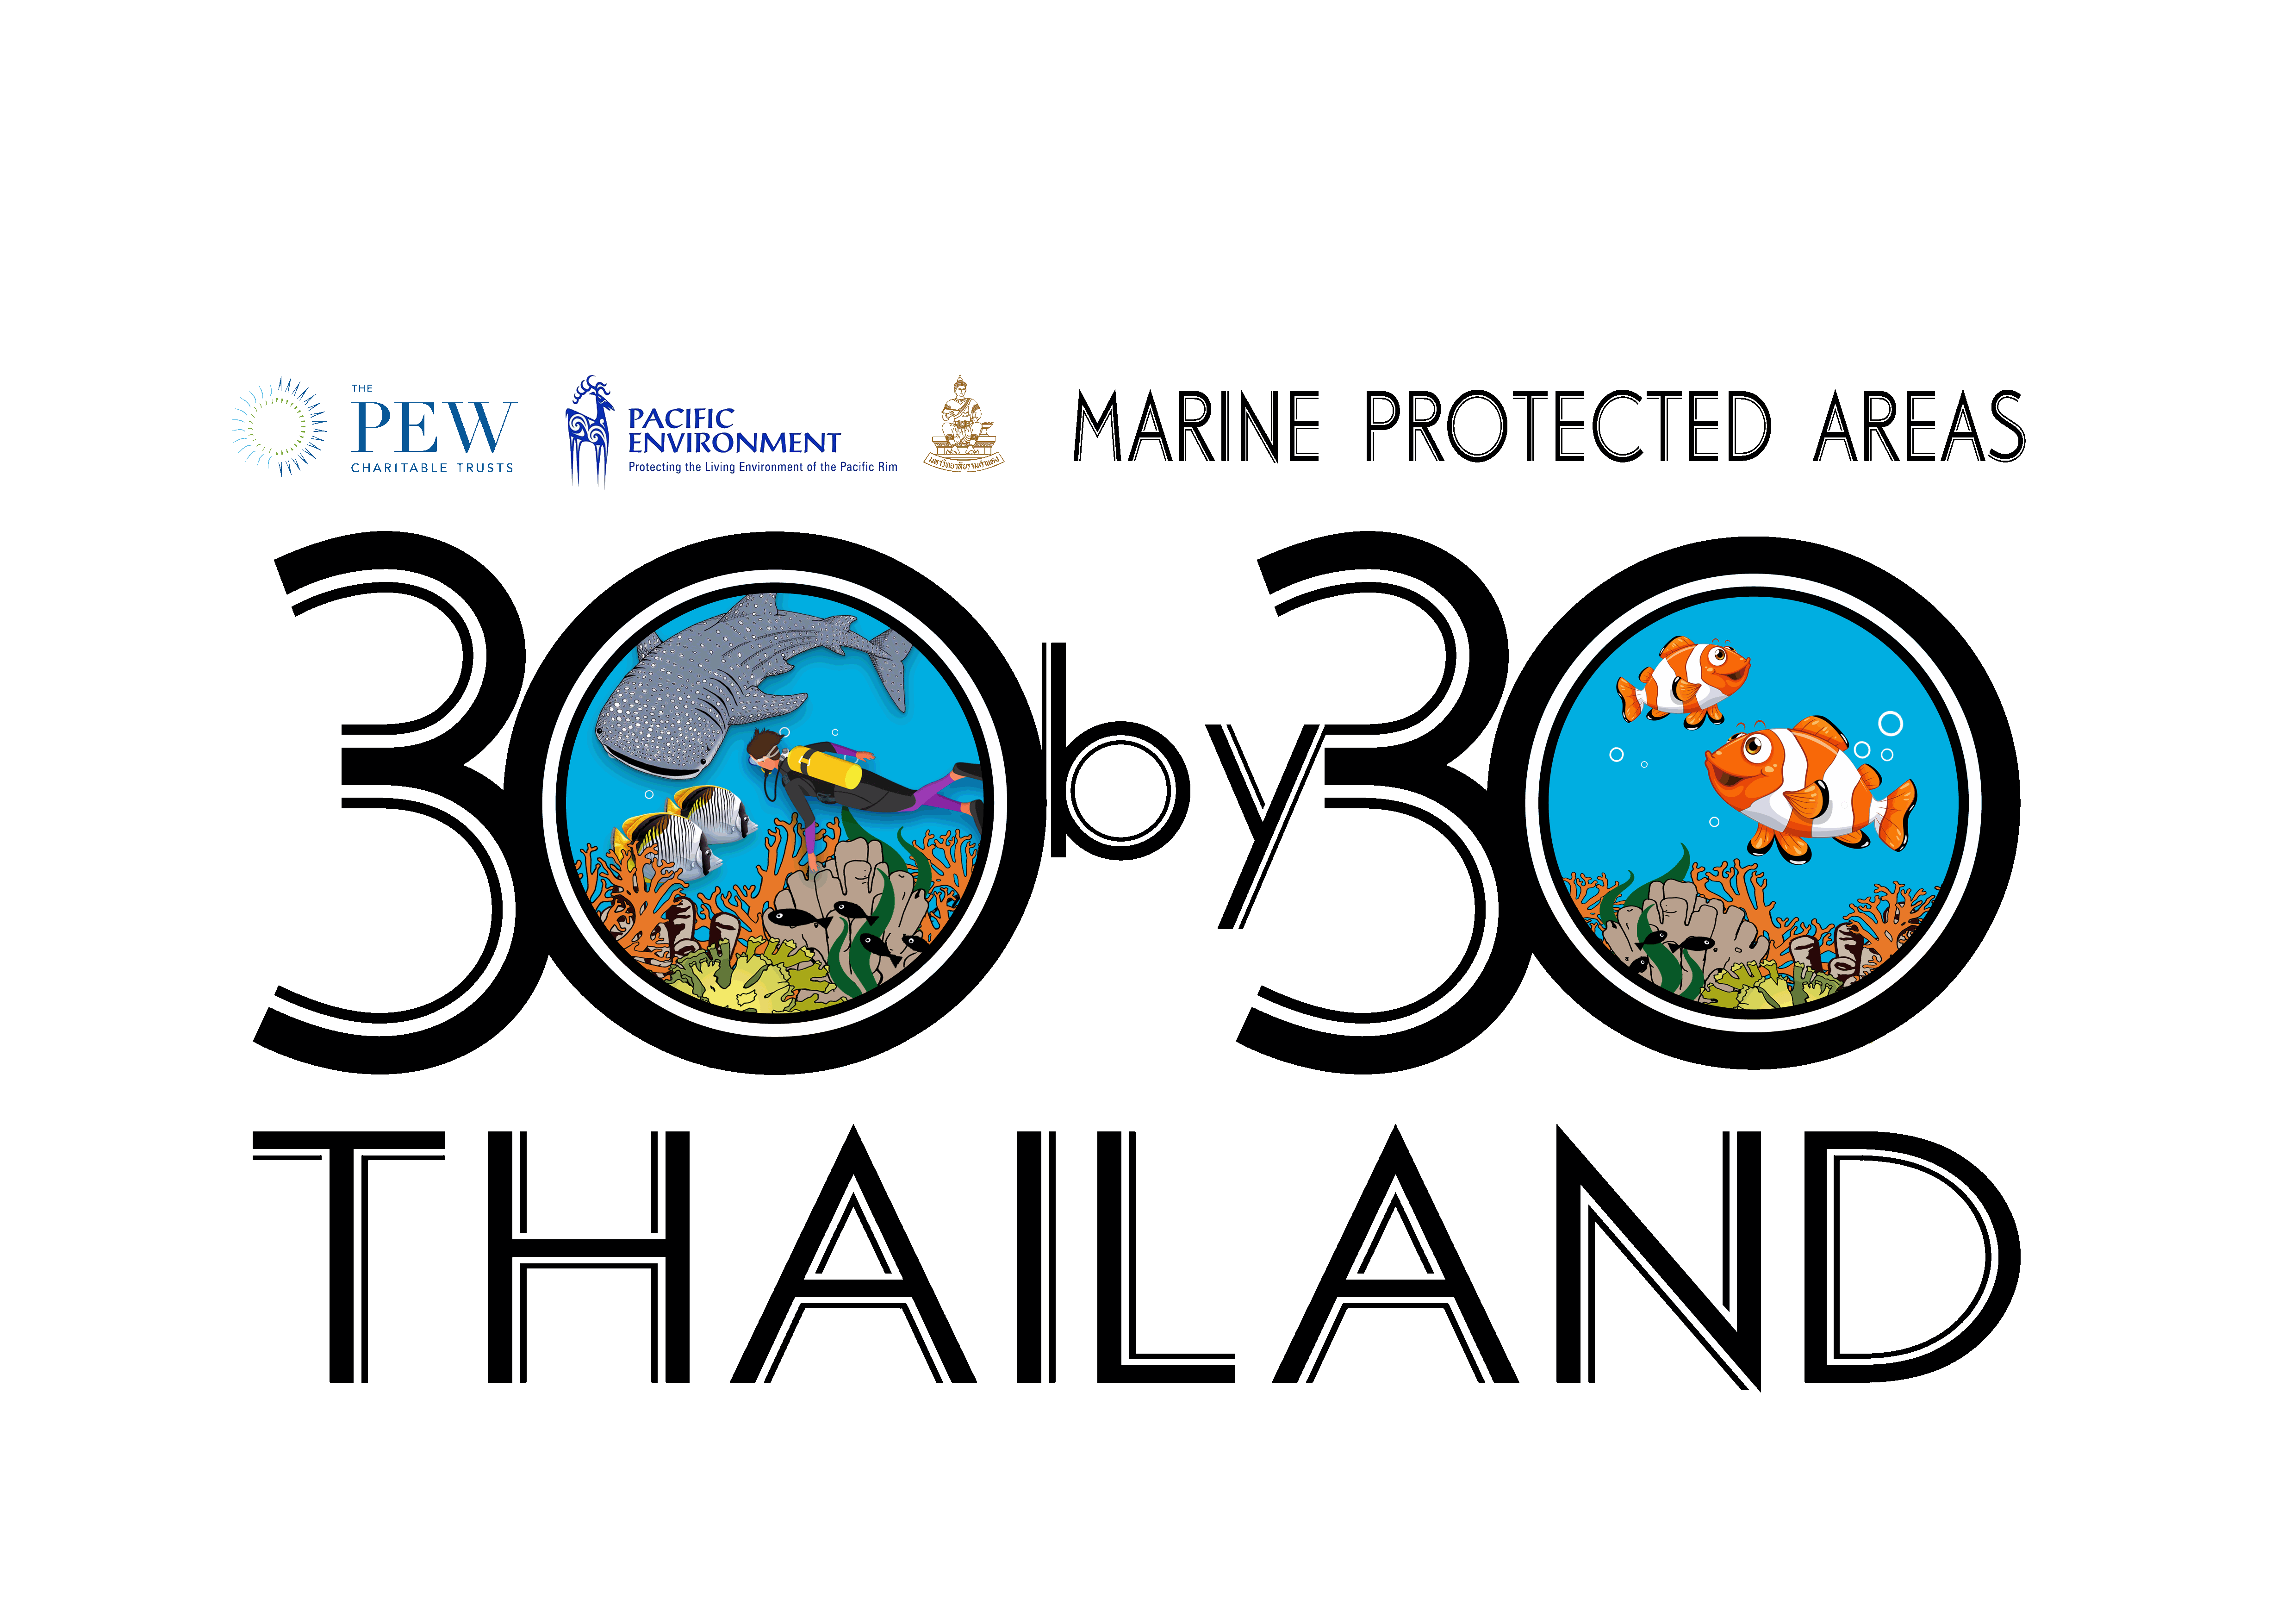 THAILAND: 30 BY 30 INITIATIVES